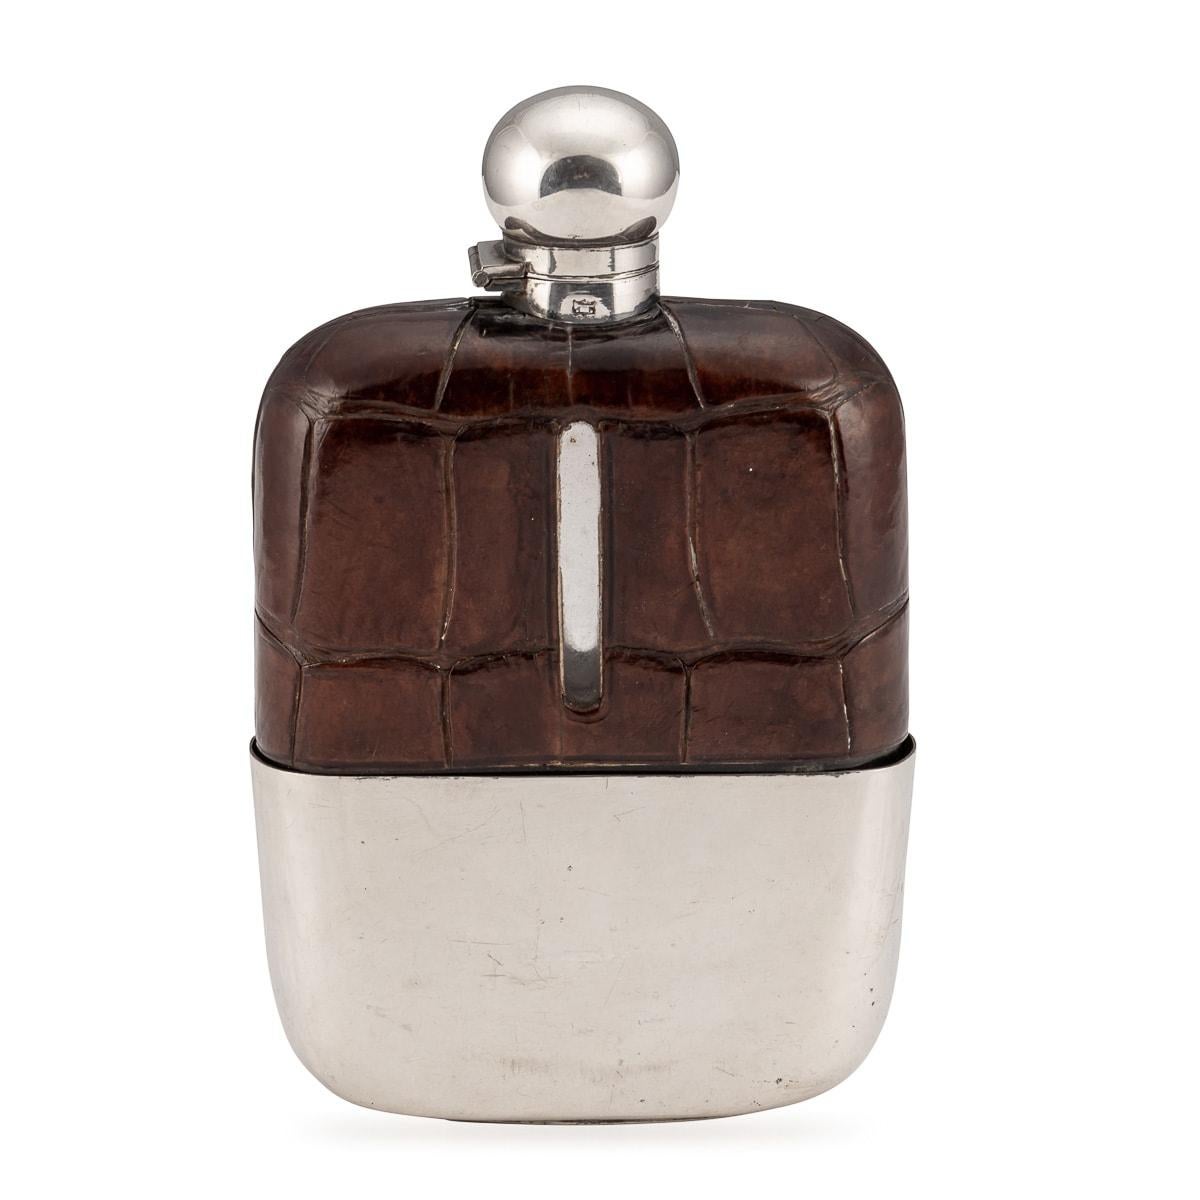 British 20th Century Silver Plated & Leather Hip Flask, James Dixon & Sons, c.1900 For Sale